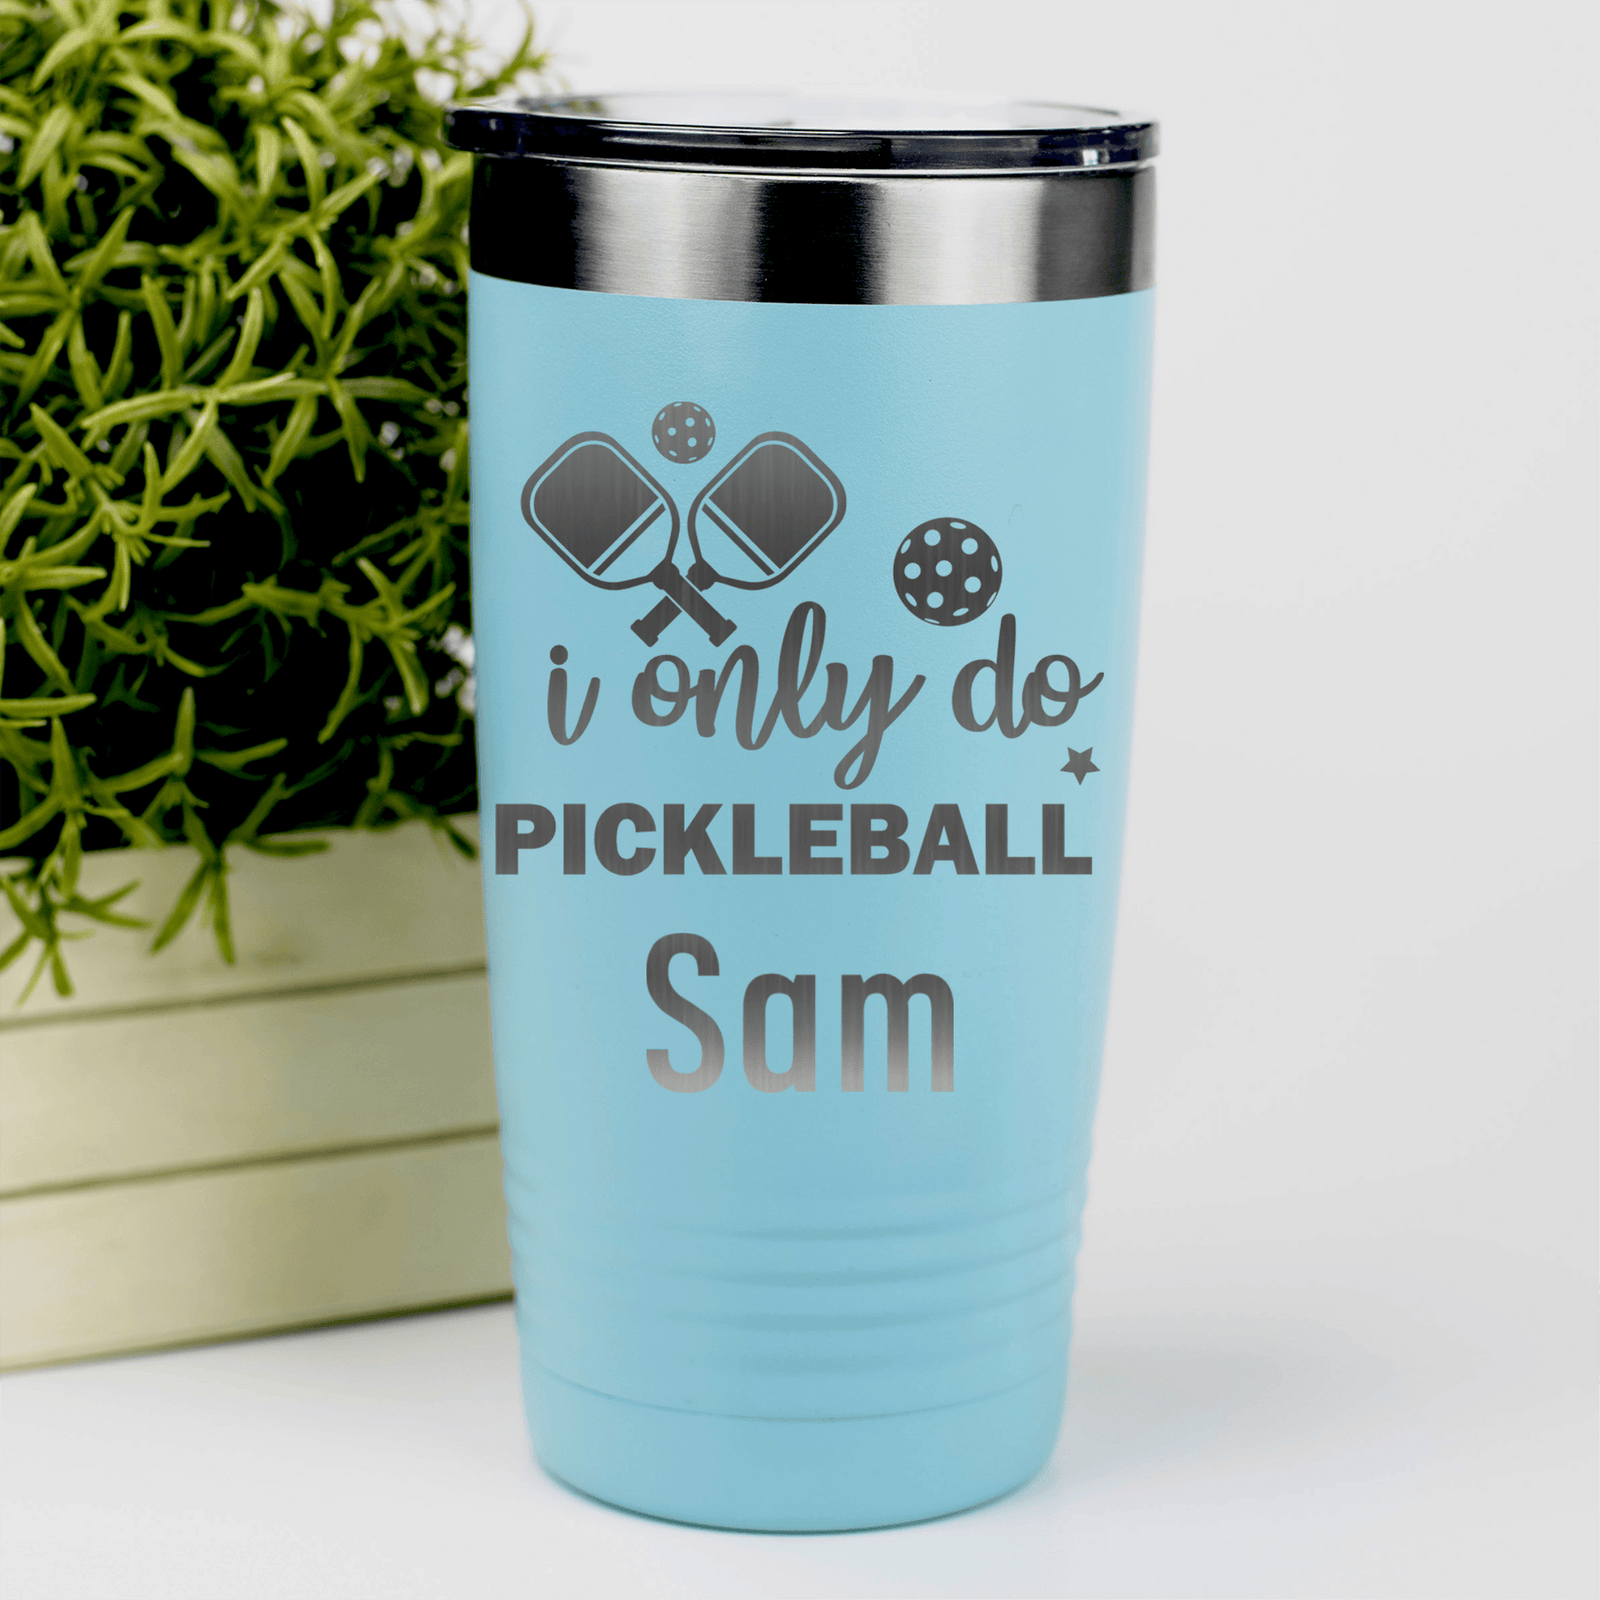 Teal Pickleball Tumbler With Nothin But Pickle Design